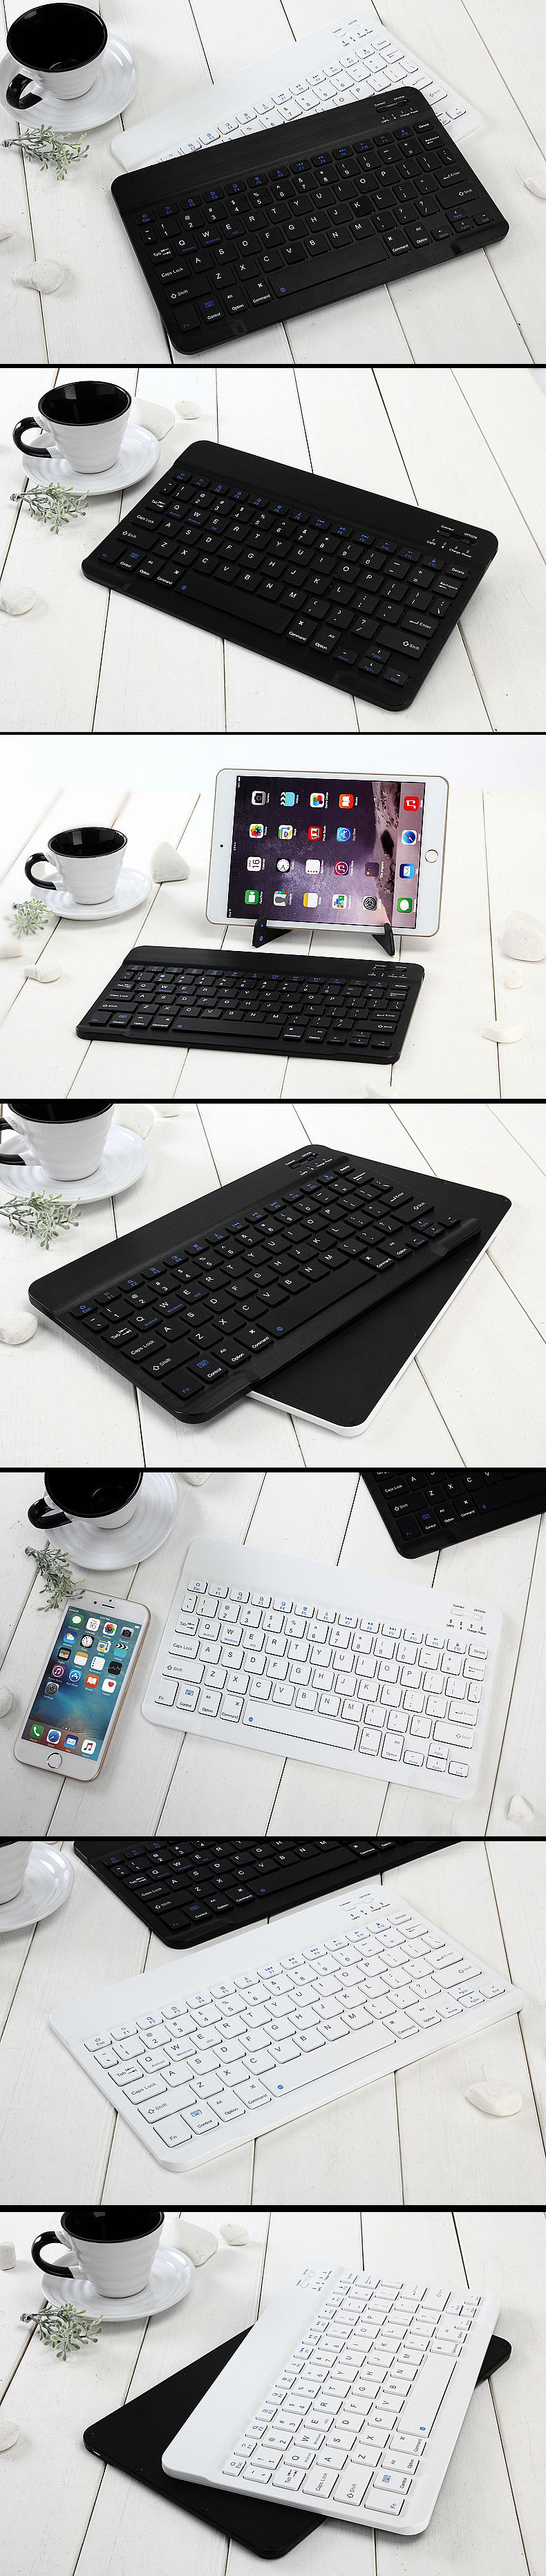 Bakeey-110mAh-bluetooth-Wireless-Keyboard-for-iPad-Mobile-Phone-Tablet-PC-iOS-Android-System-1874689-8